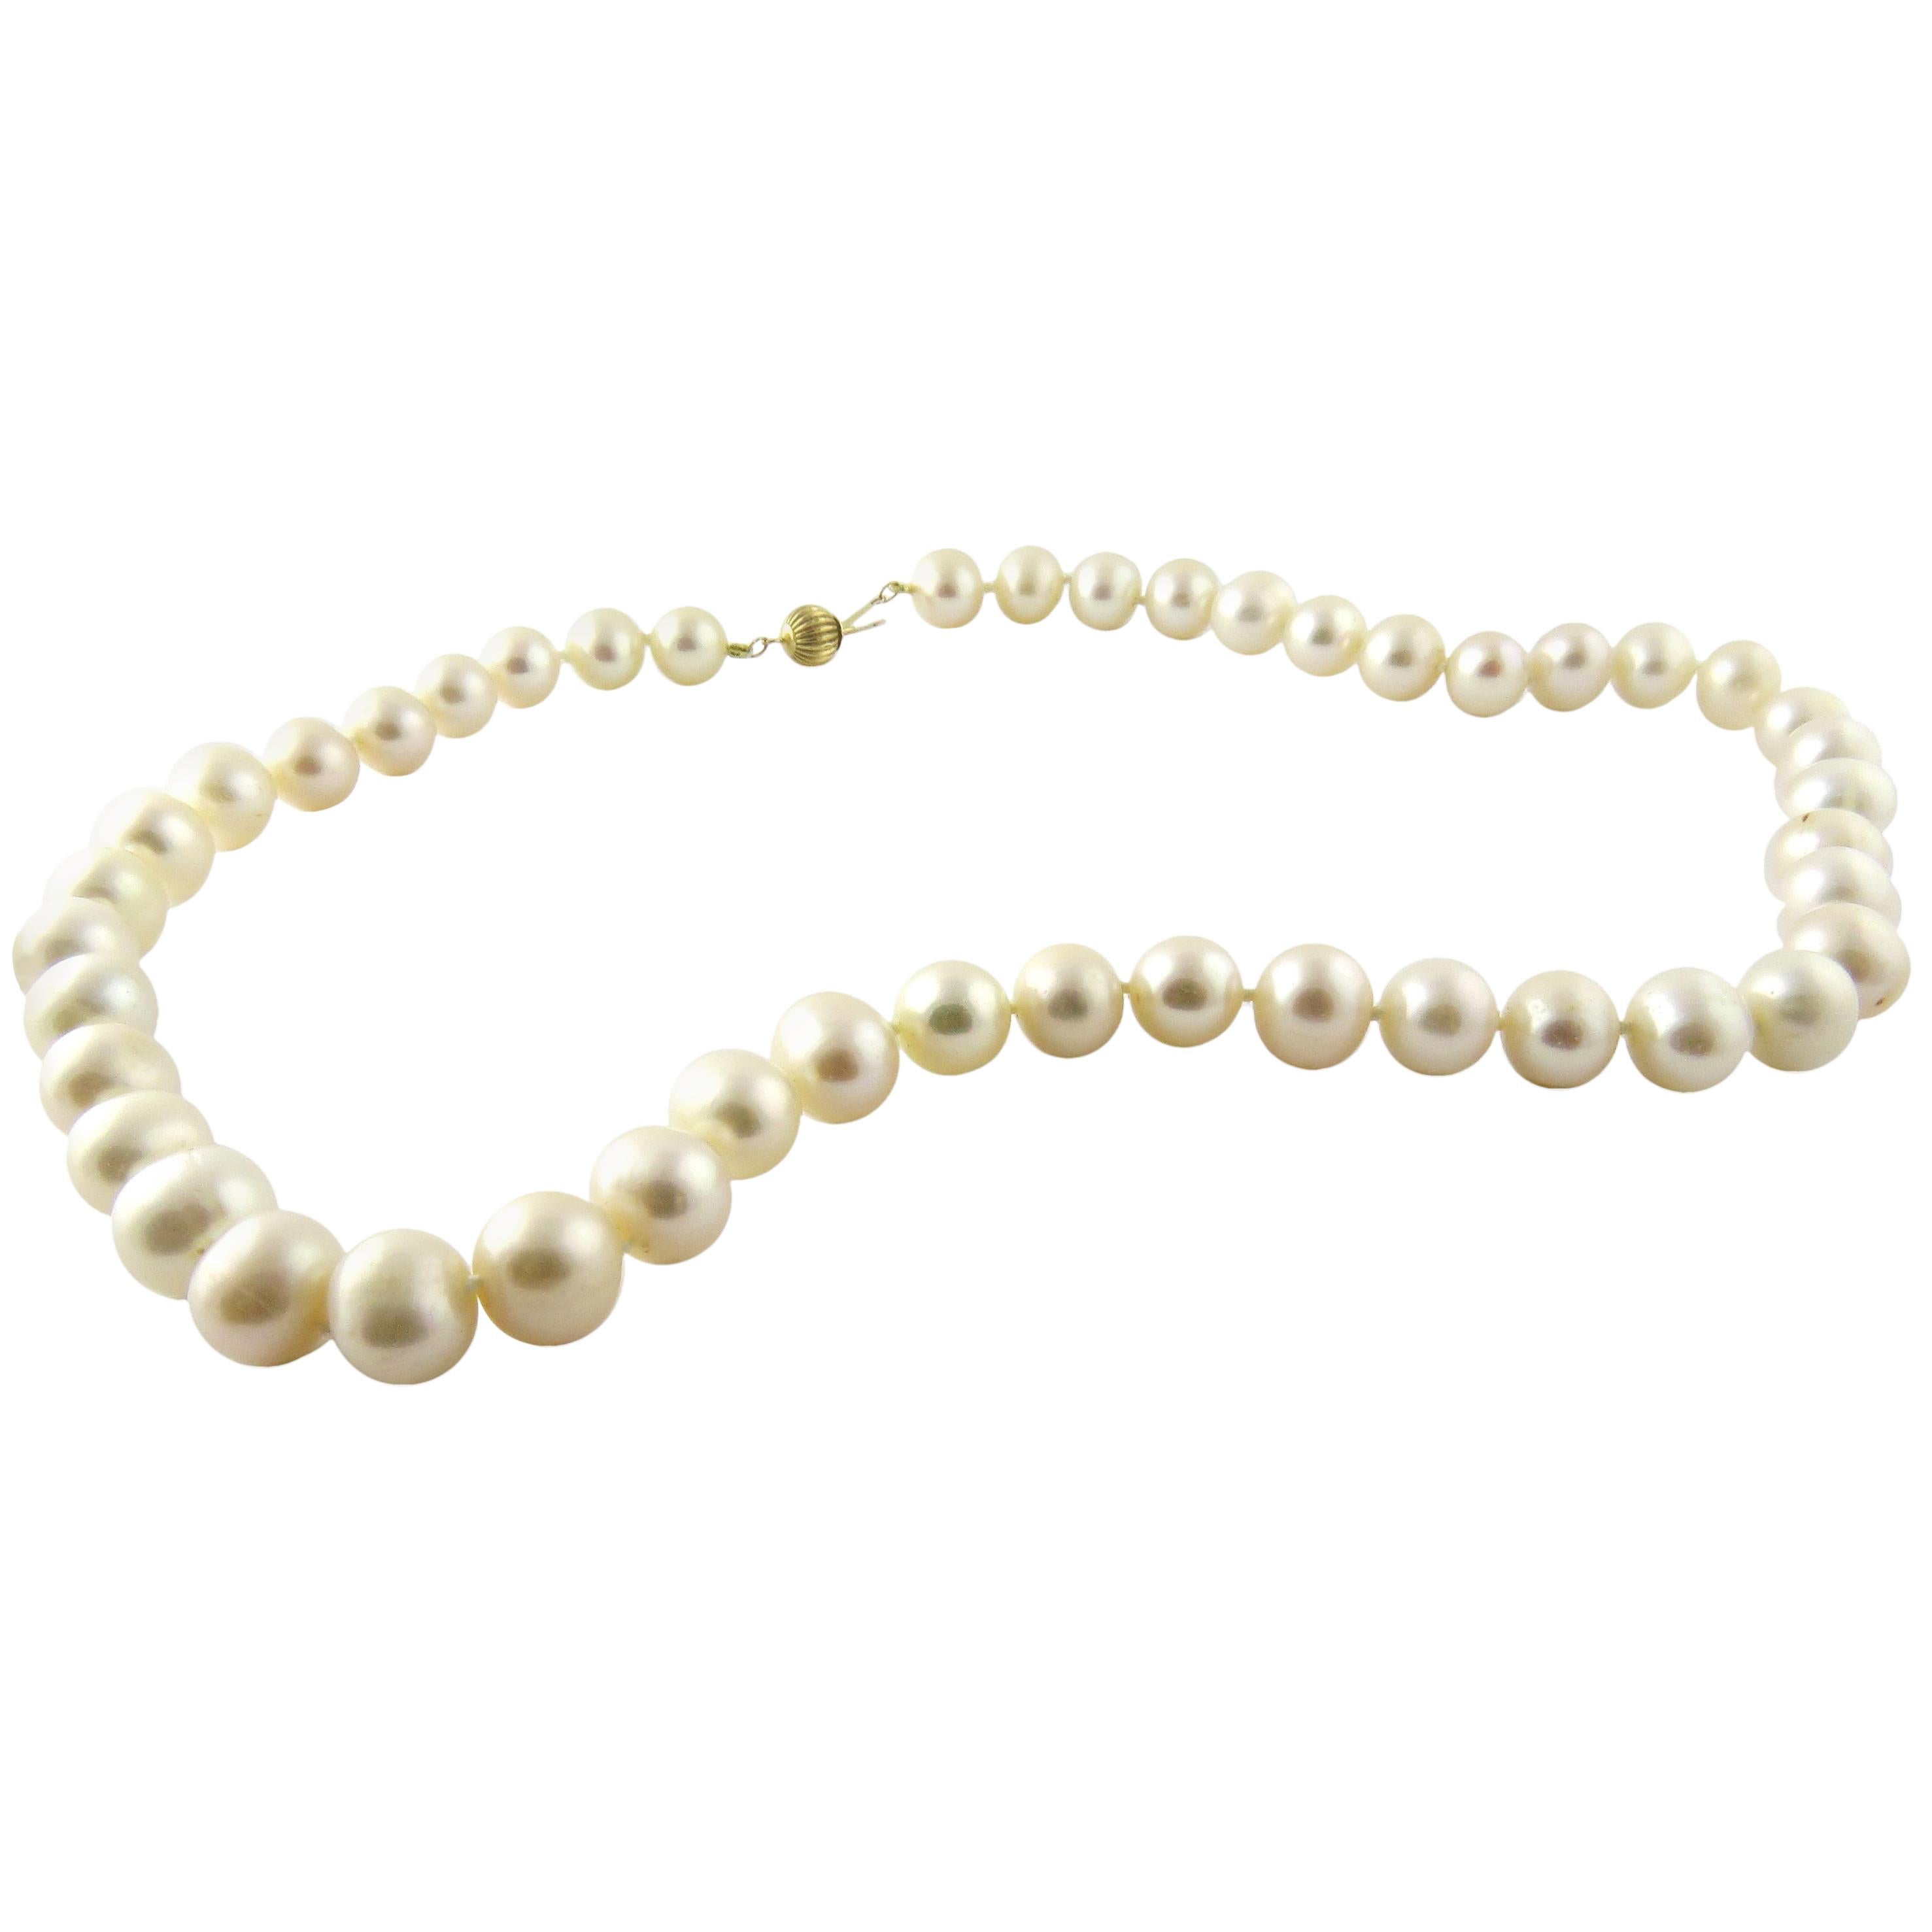 Freshwater Pearl Necklace with 14 Karat Yellow Gold Closure For Sale